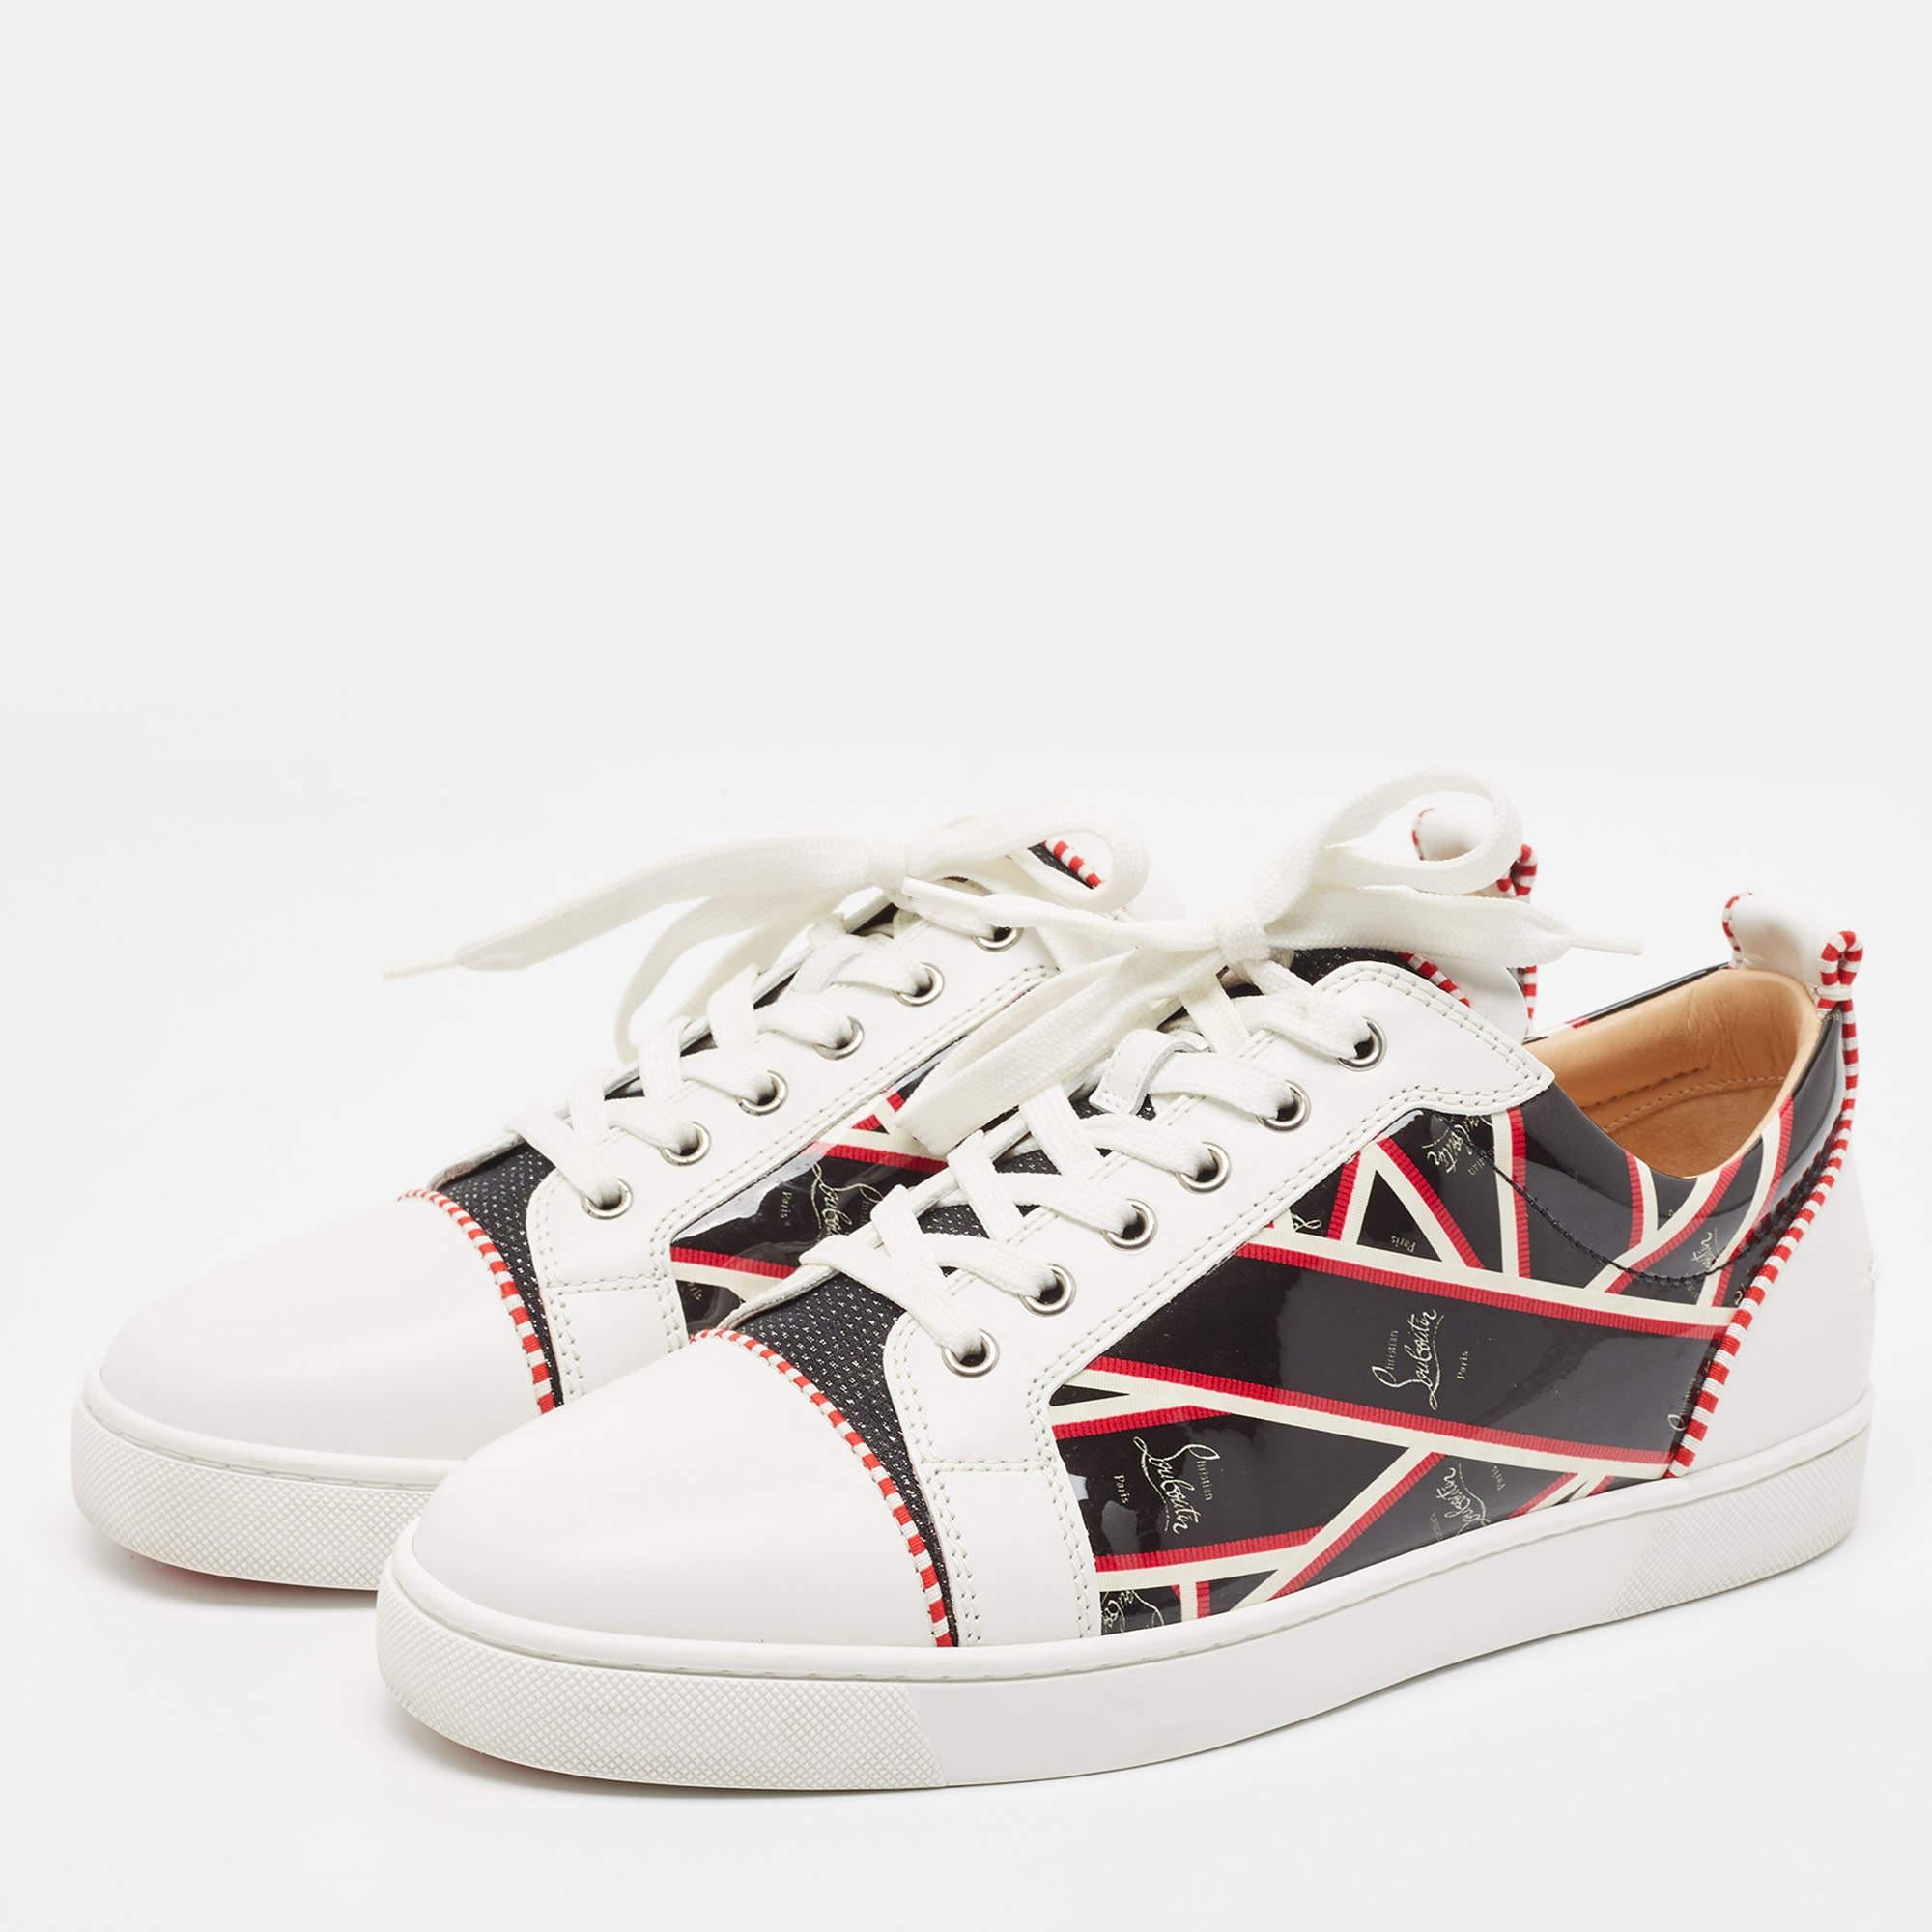 Christian Louboutin Printed Patent and Leather Orlato Sneakers Size 42.5 For Sale 4